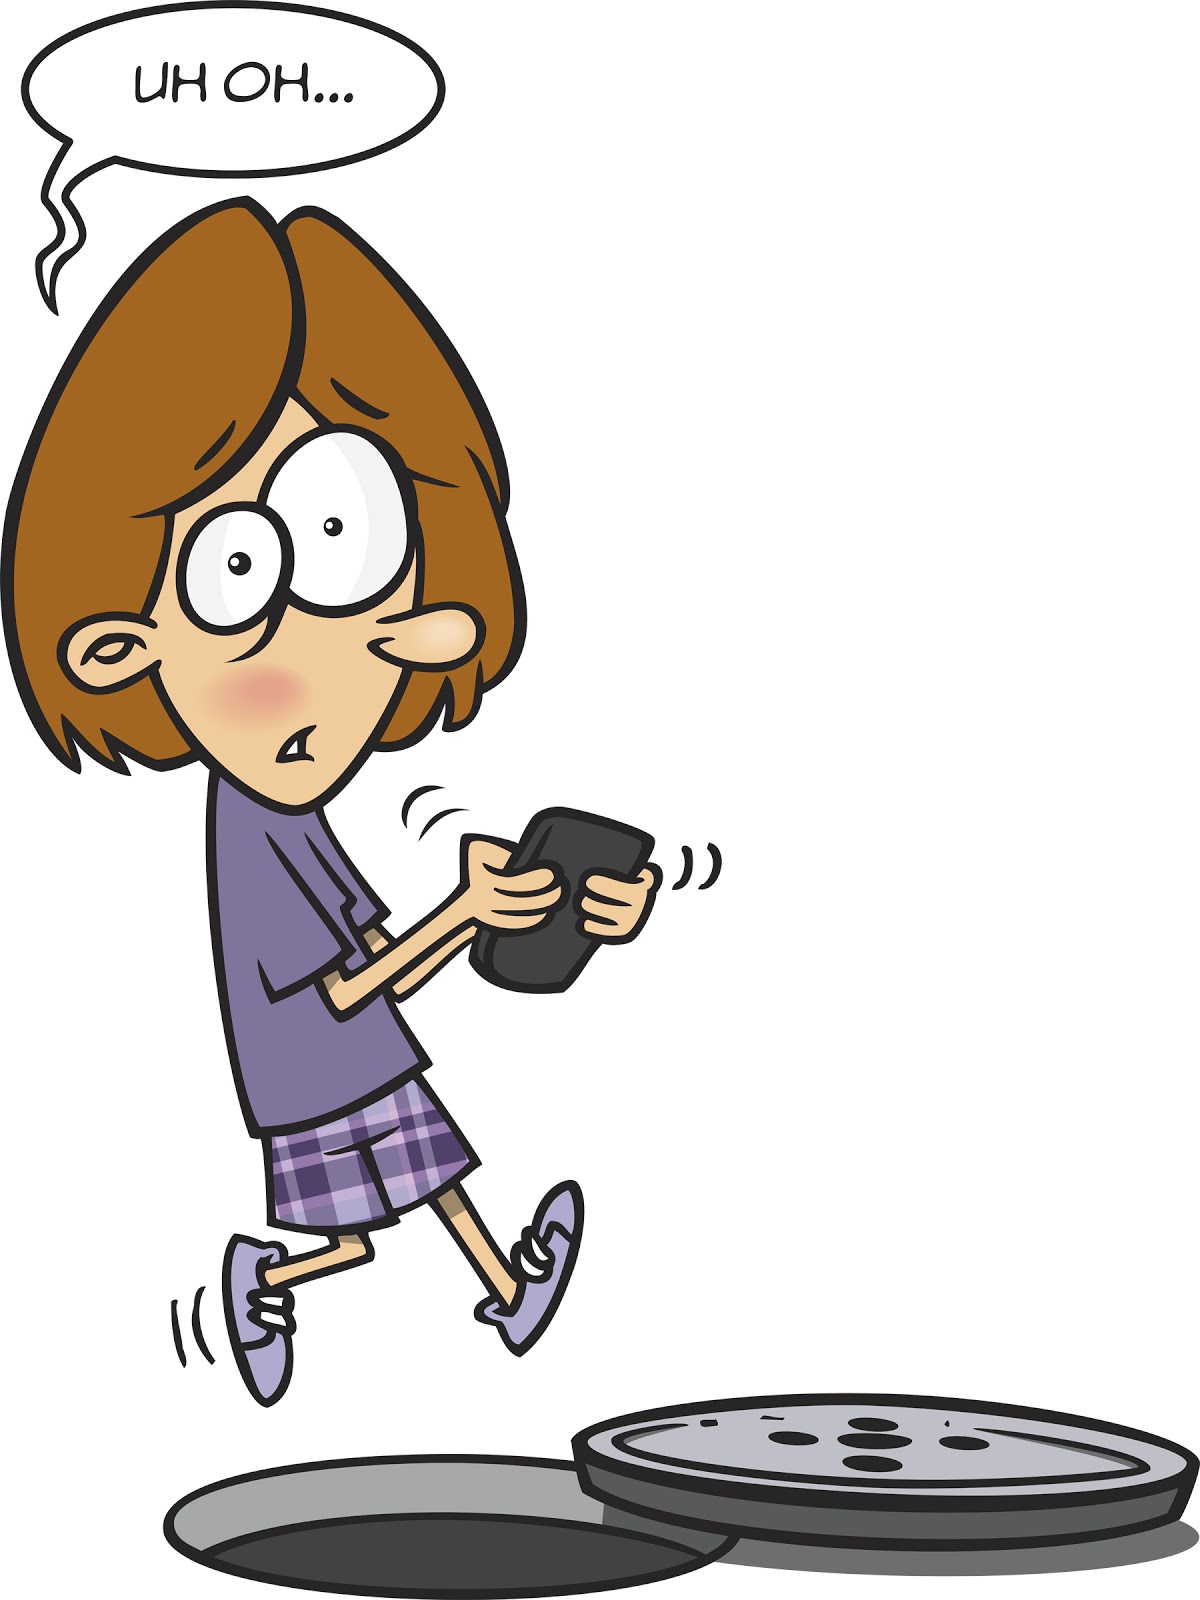 phone message clipart - photo #10